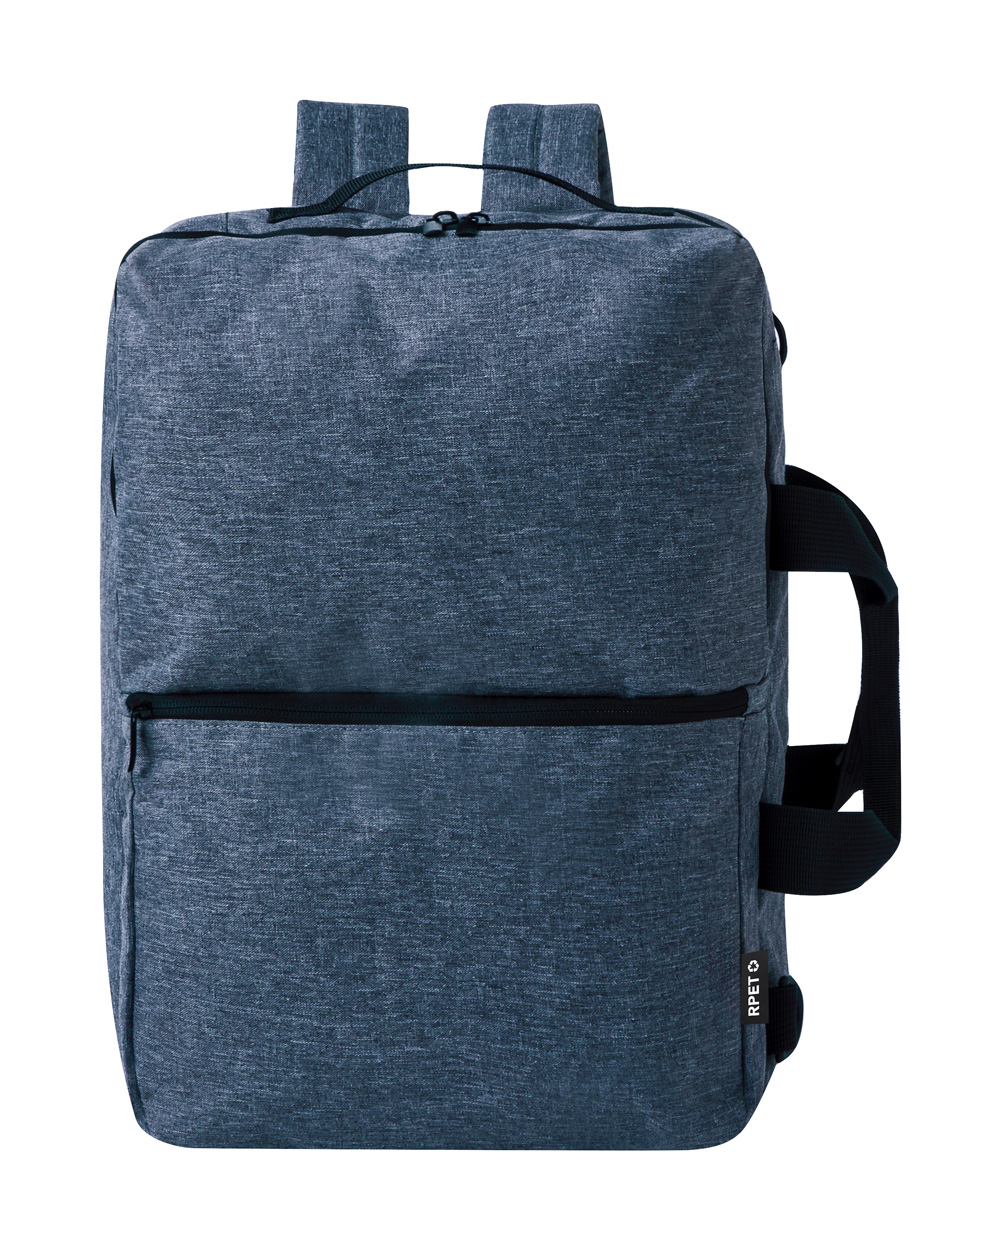 Makarzur RPET backpack for documents - blue